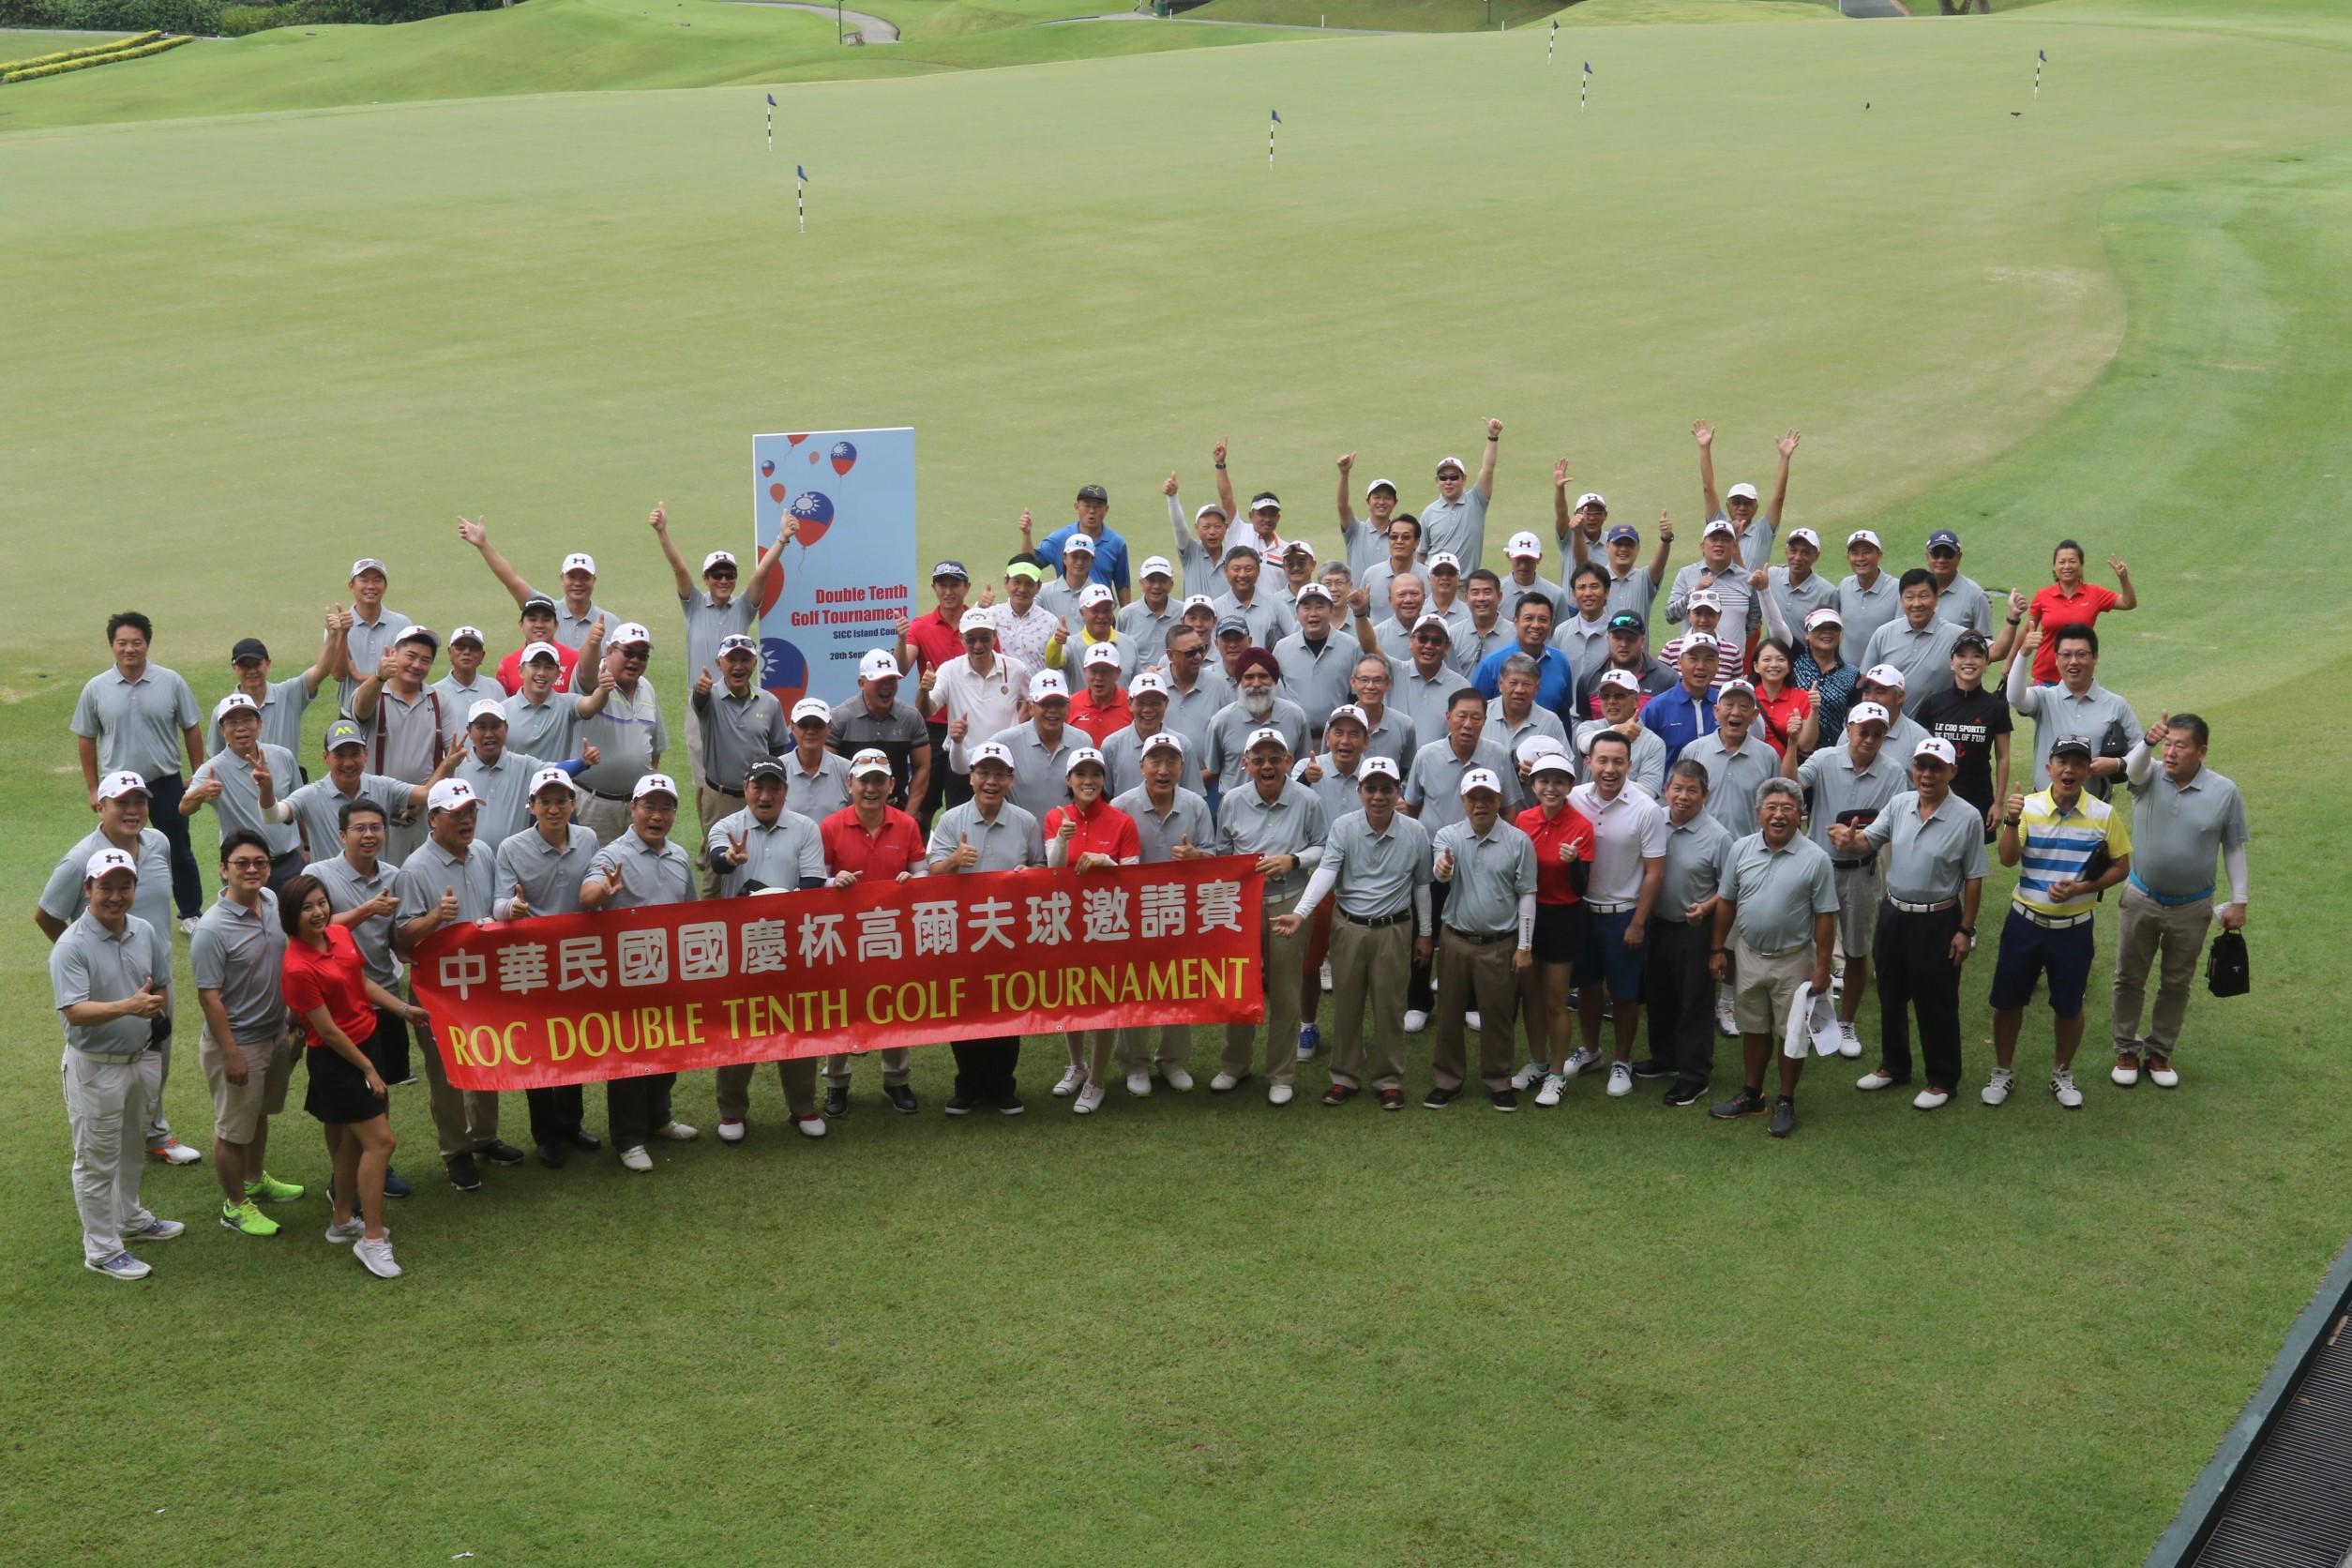 Group photo of golfers at the opening of the ROC 106th Double Tenth Golf Tournament.